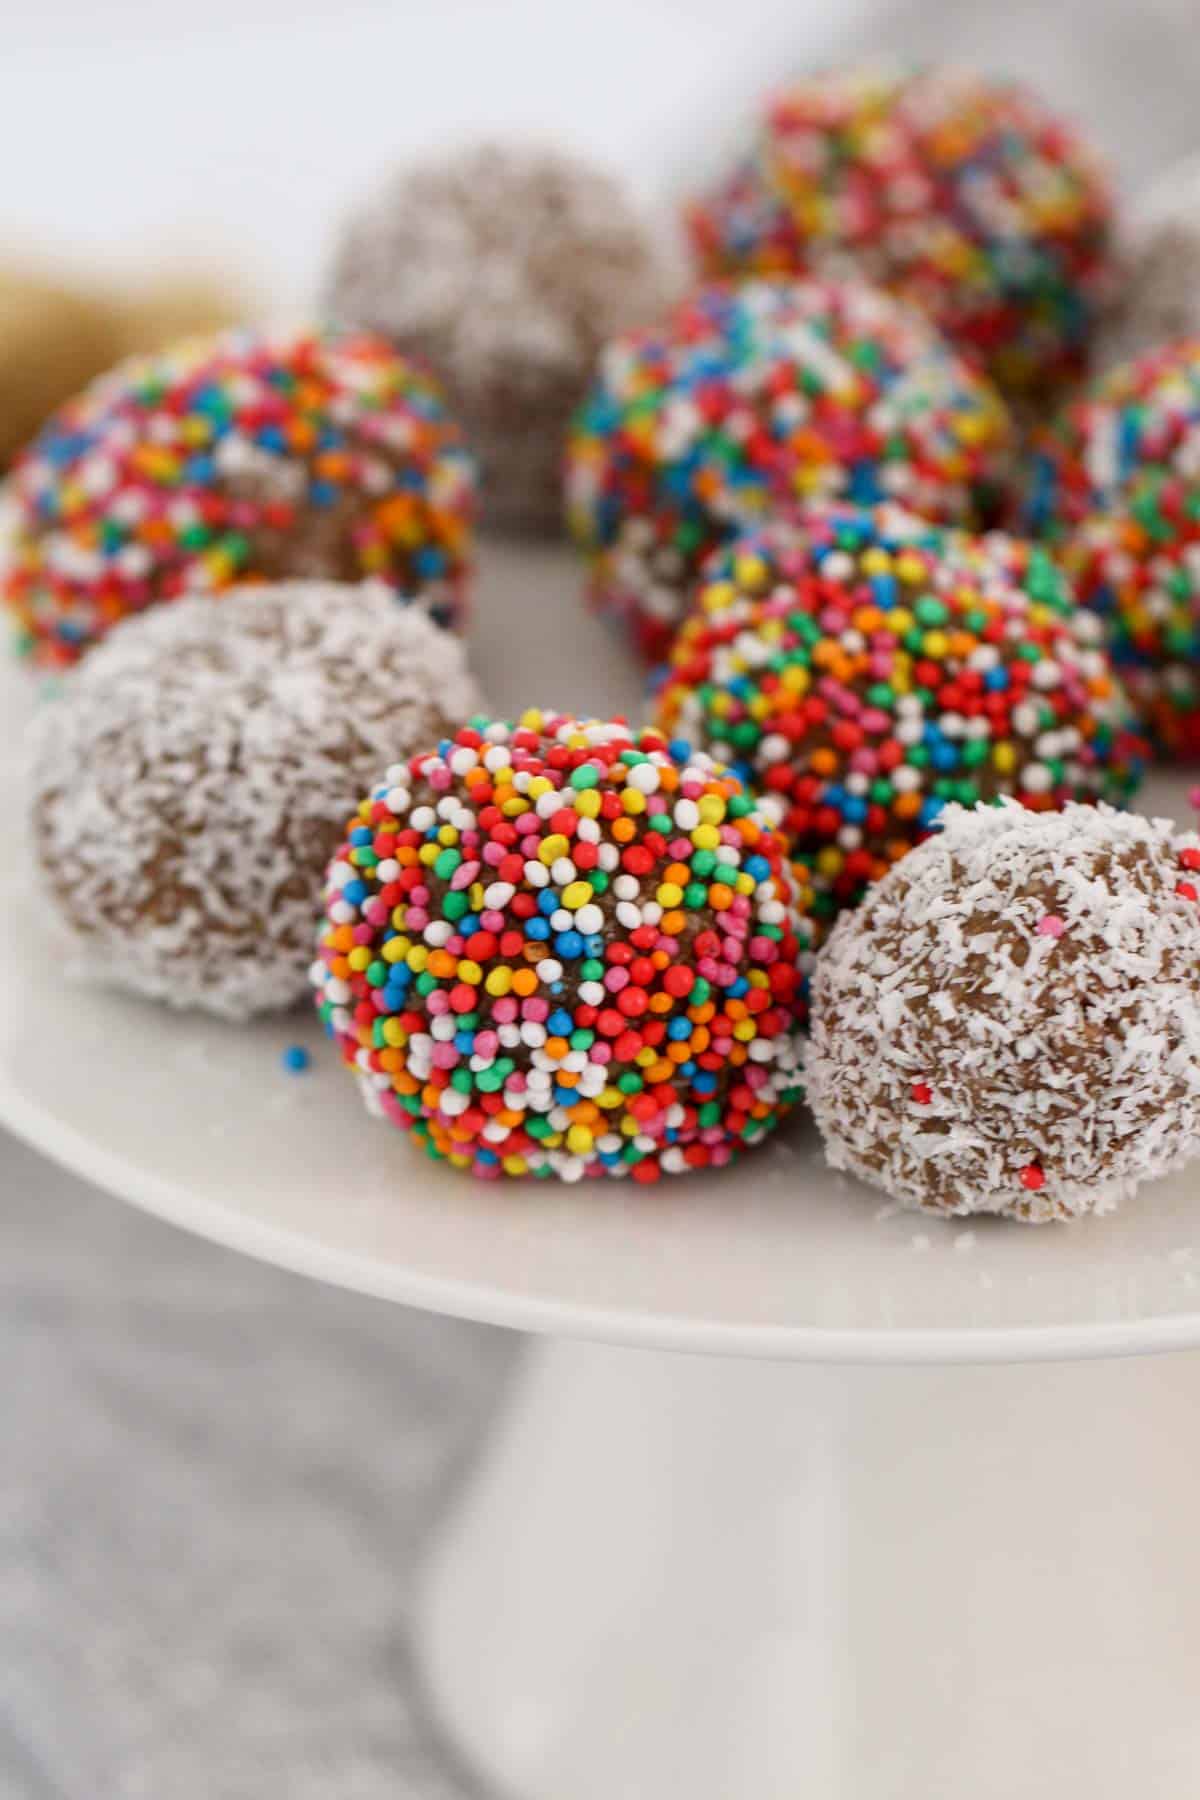 A close up of Milo balls covered in sprinkles and coconut.